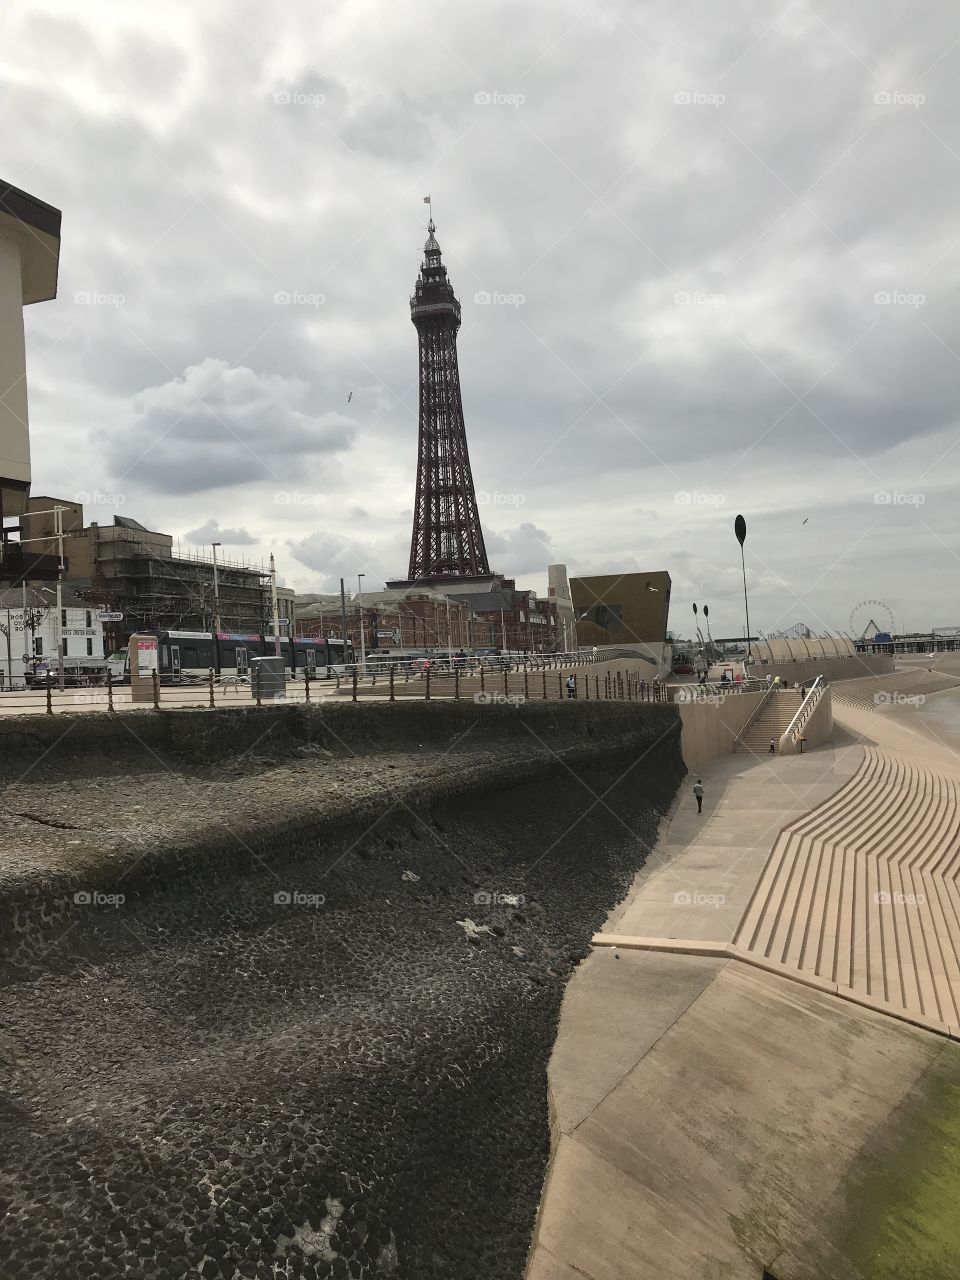 Bkackpool tower where am I Blackpool the sun was never going to shine today but it didn’t matter it was a lovely day